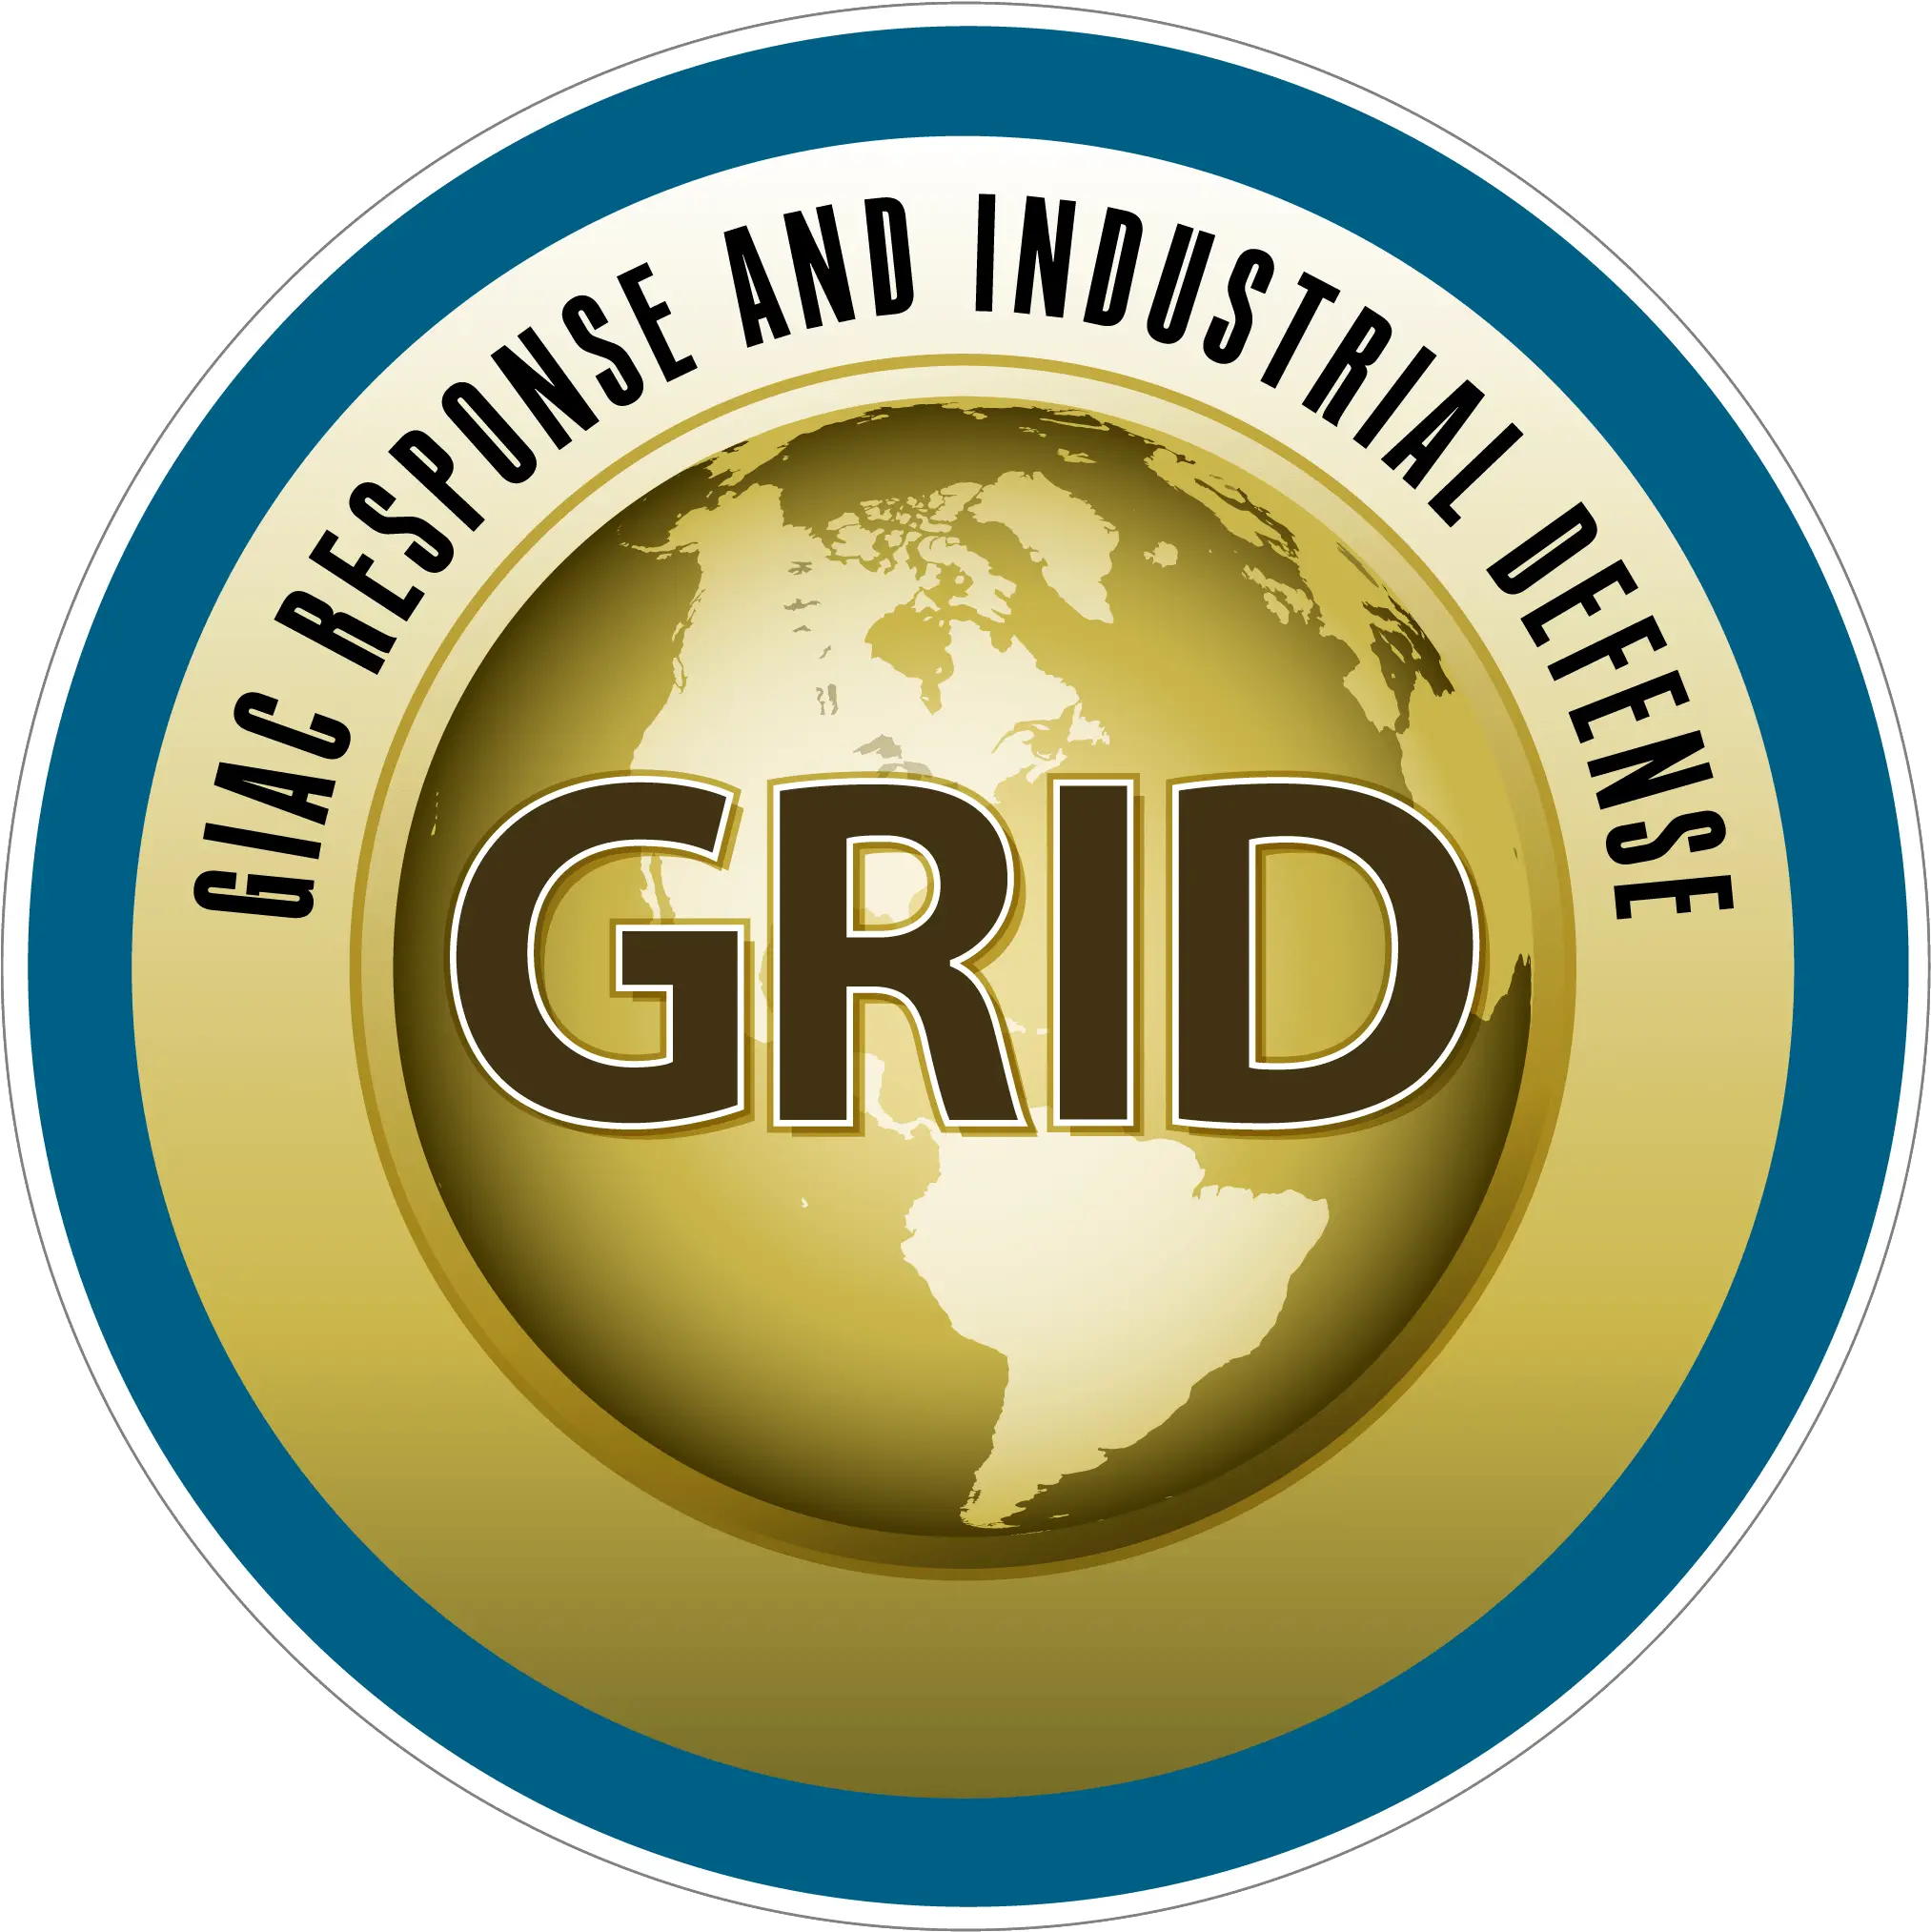 Industrial Cyber Security Certification Grid Giac Png Icon